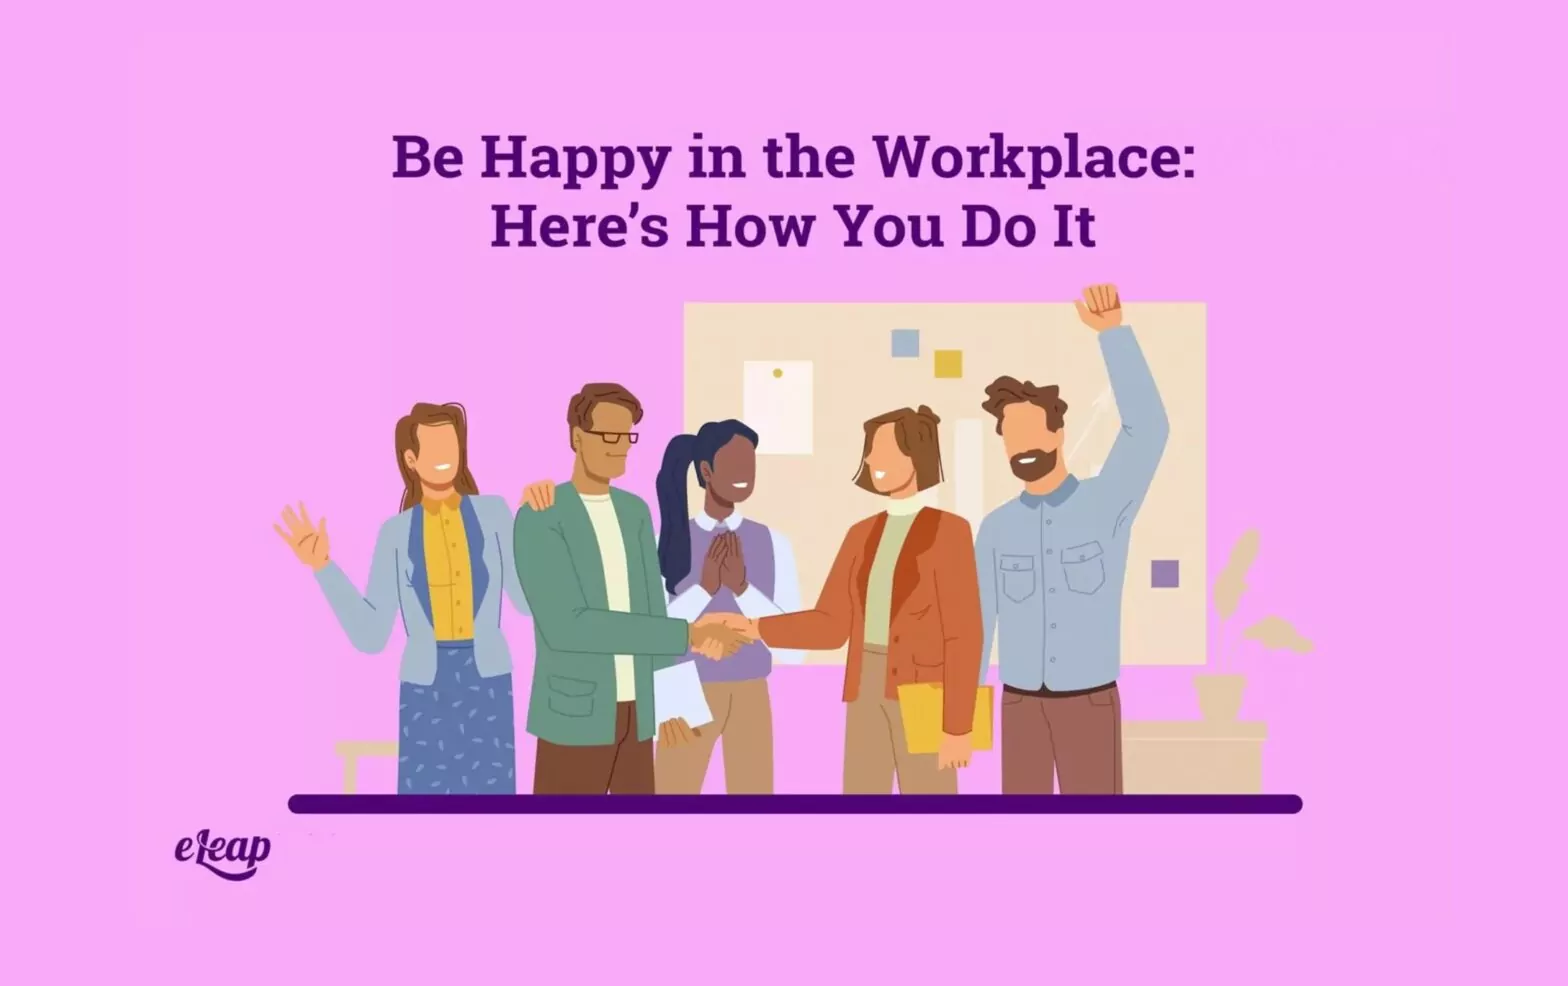 Be Happy in the Workplace: Here’s How You Do It